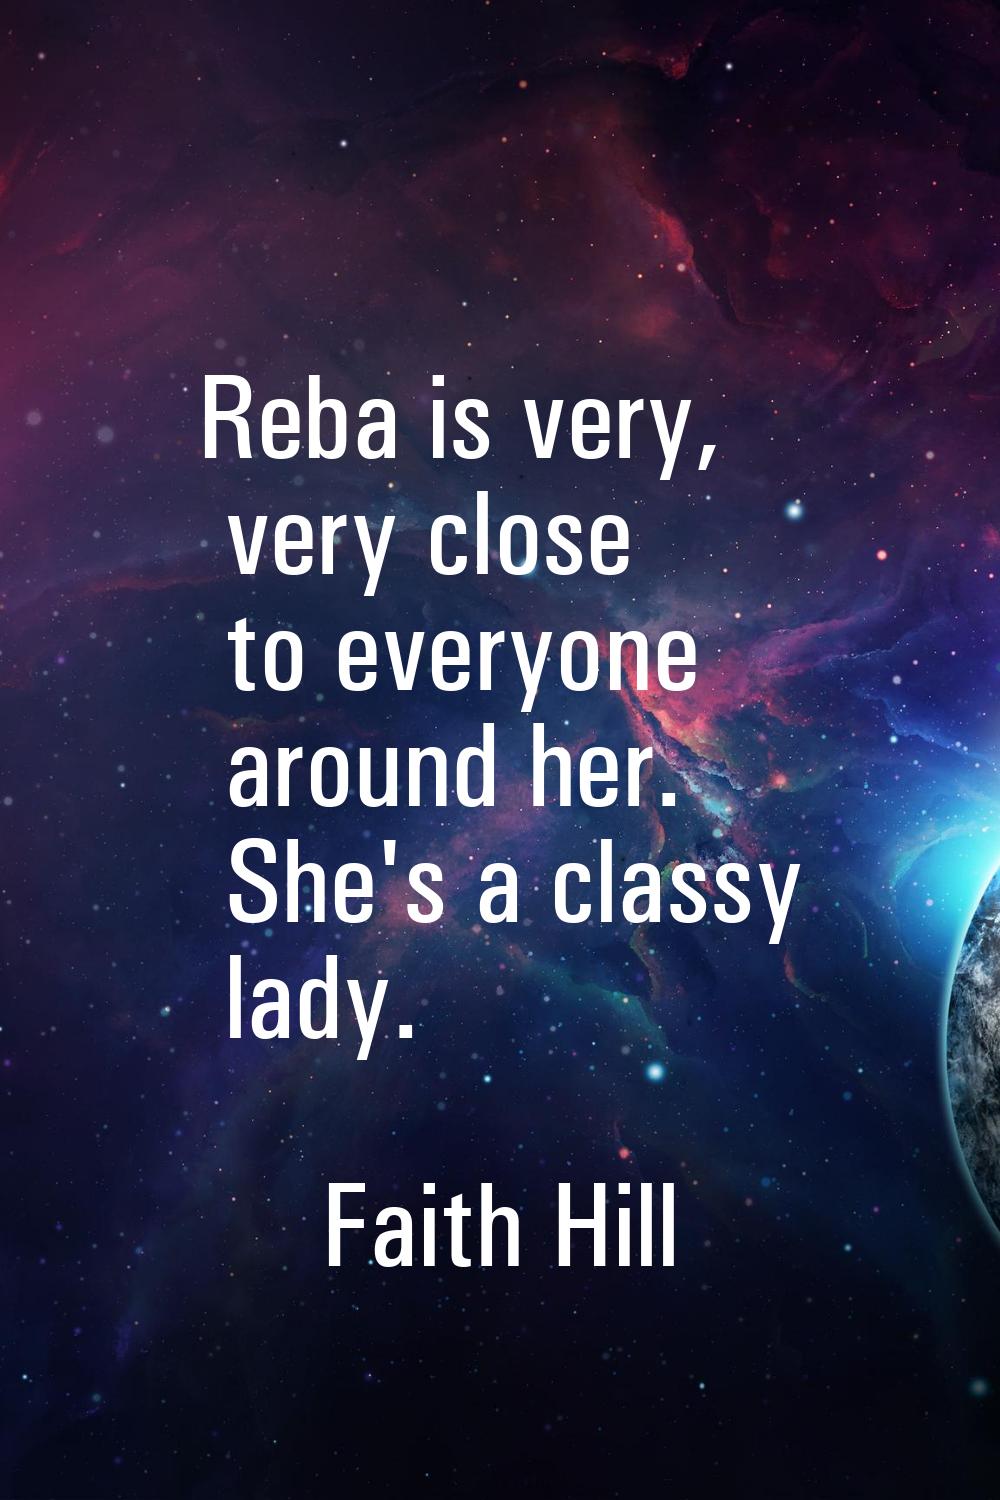 Reba is very, very close to everyone around her. She's a classy lady.